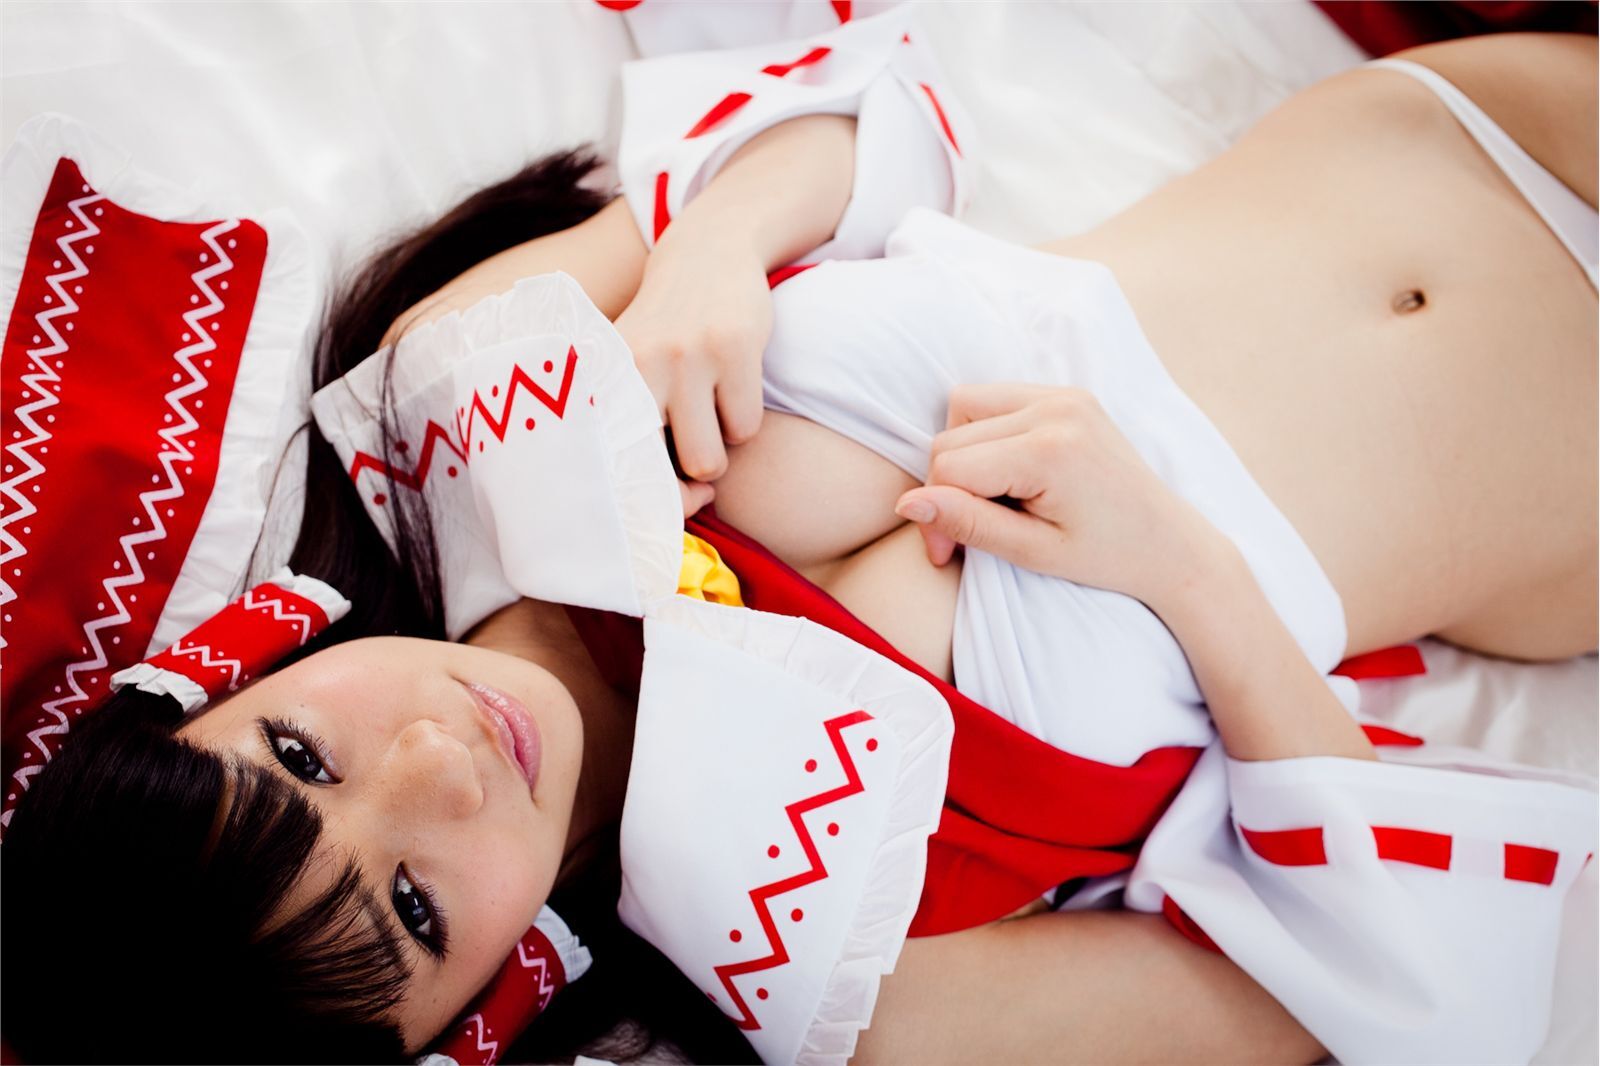 [Cosplay] Touhou Project - Reimu Hakurei with naughty face and great ass and tits